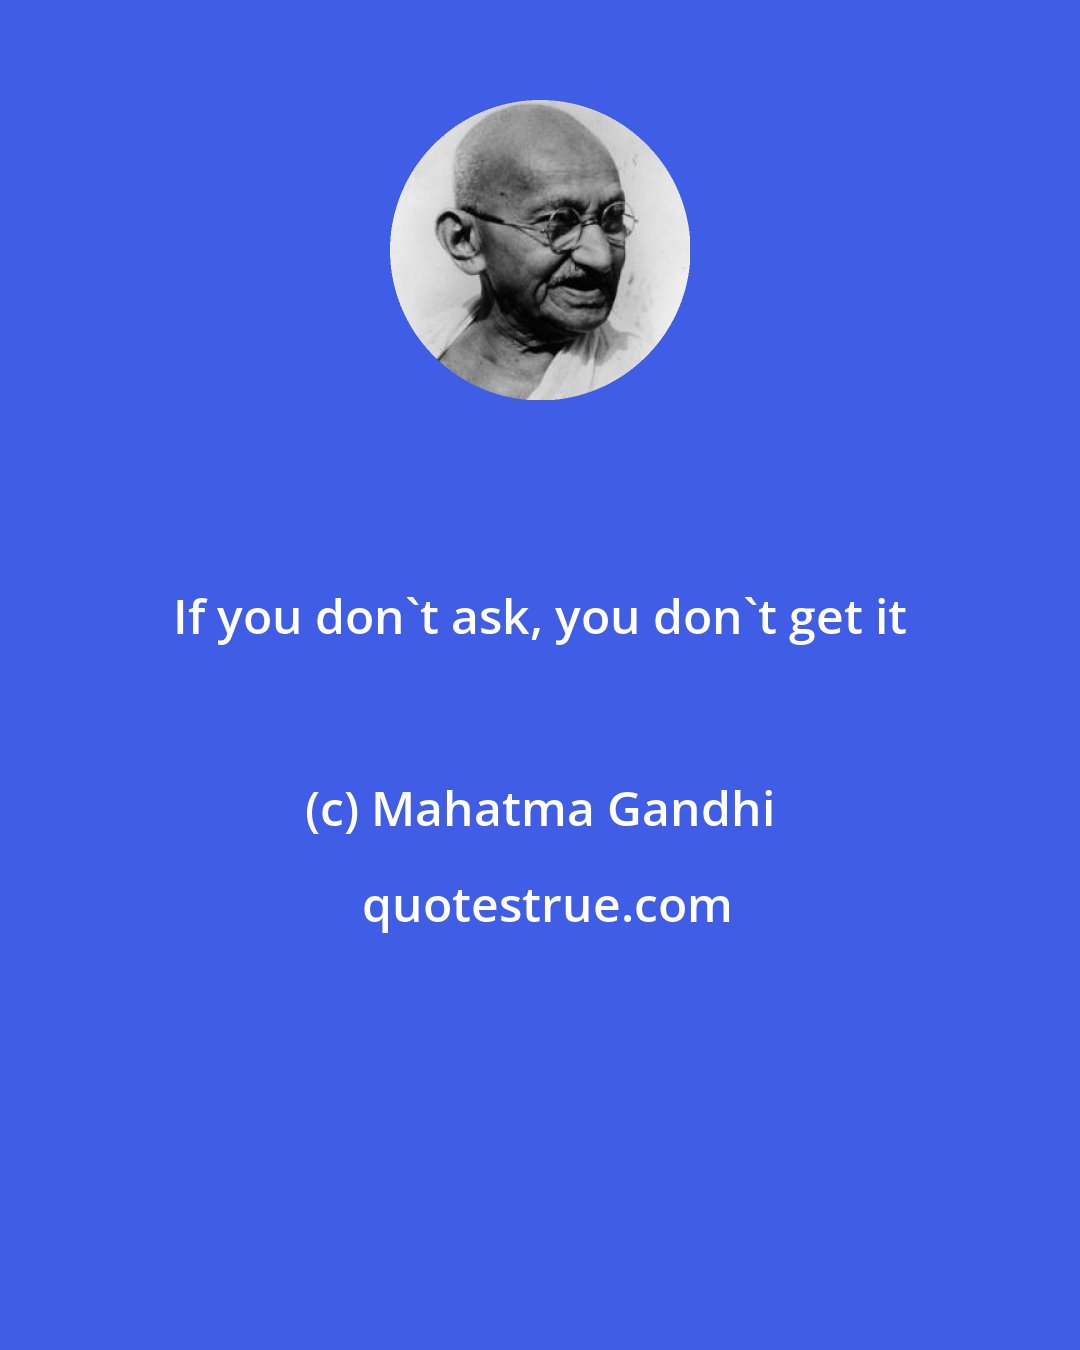 Mahatma Gandhi: If you don't ask, you don't get it